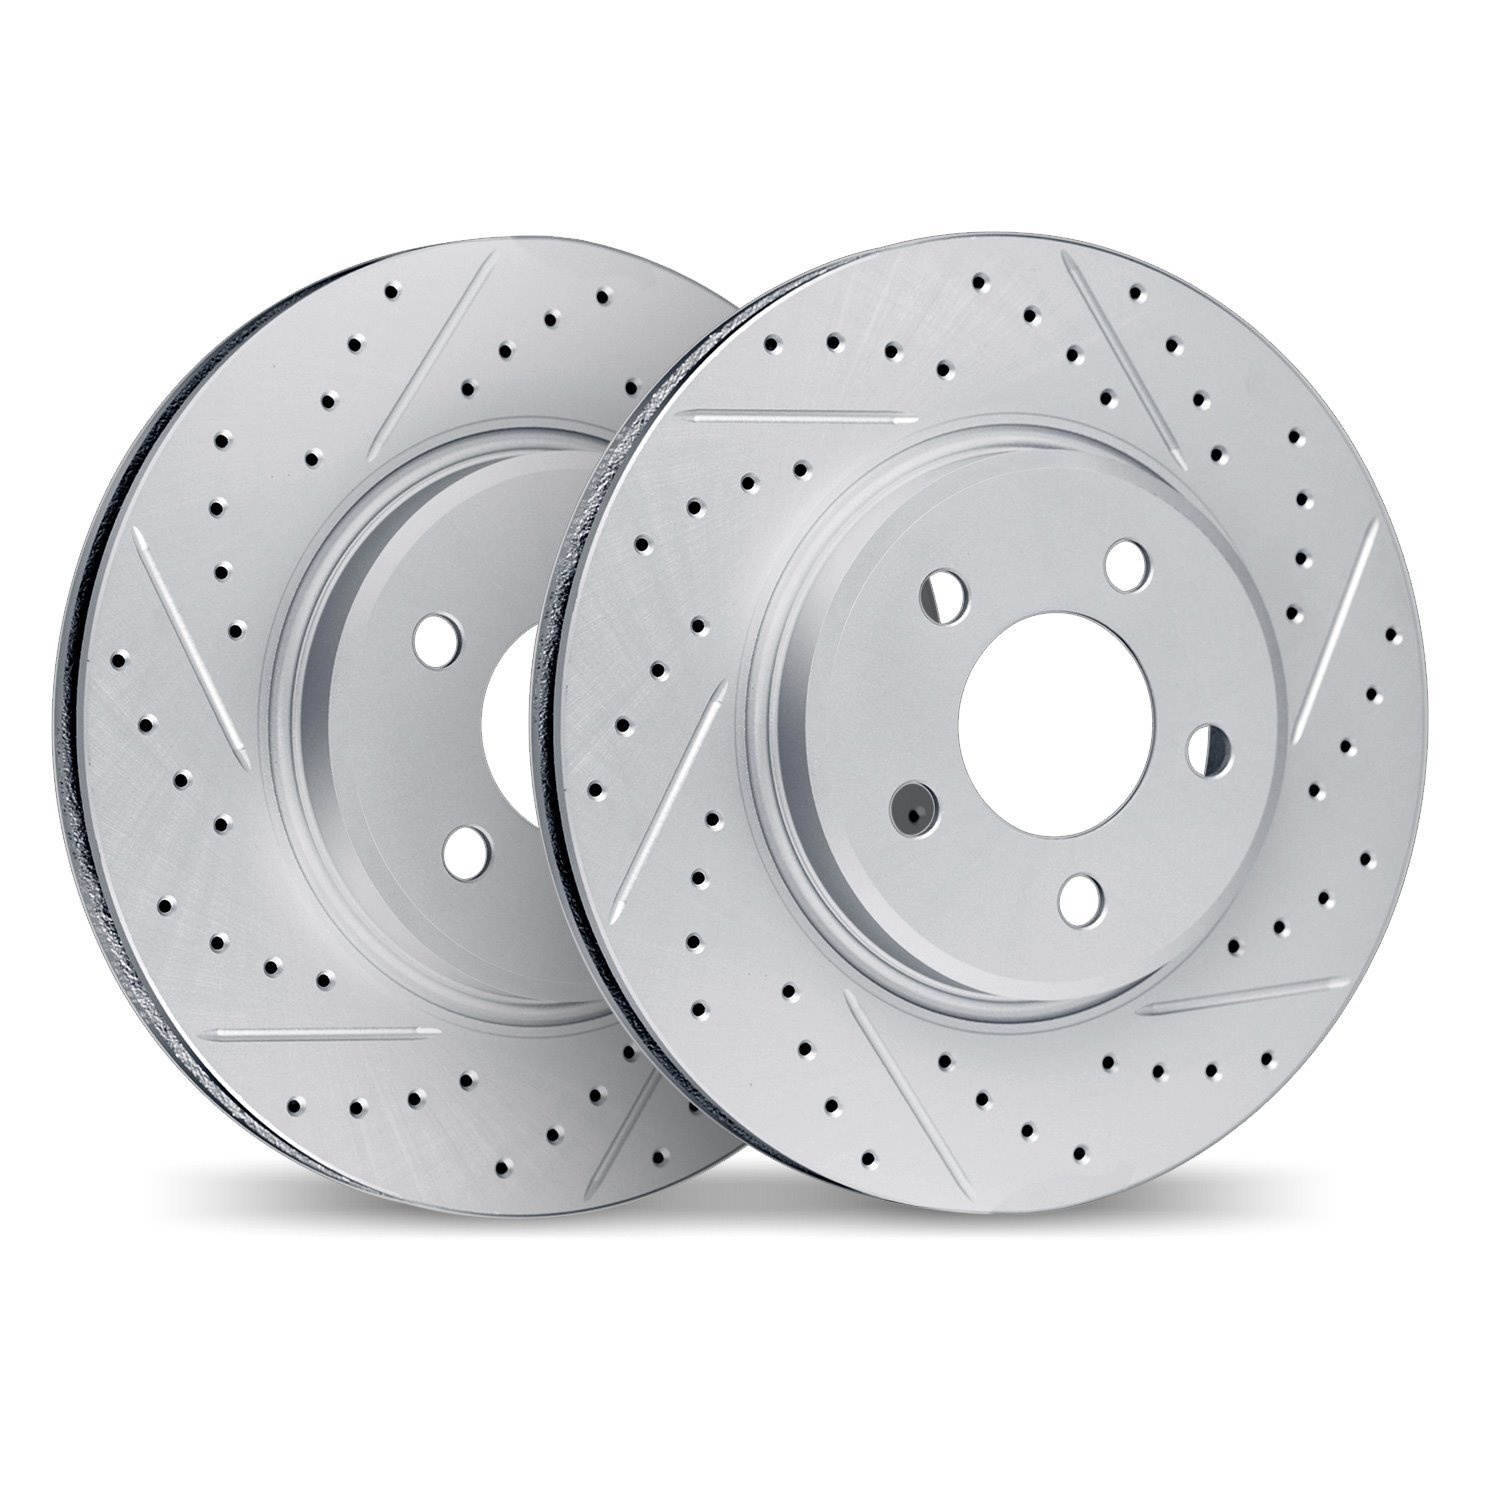 2002-48014 Geoperformance Drilled/Slotted Brake Rotors, 1997-2005 GM, Position: Front